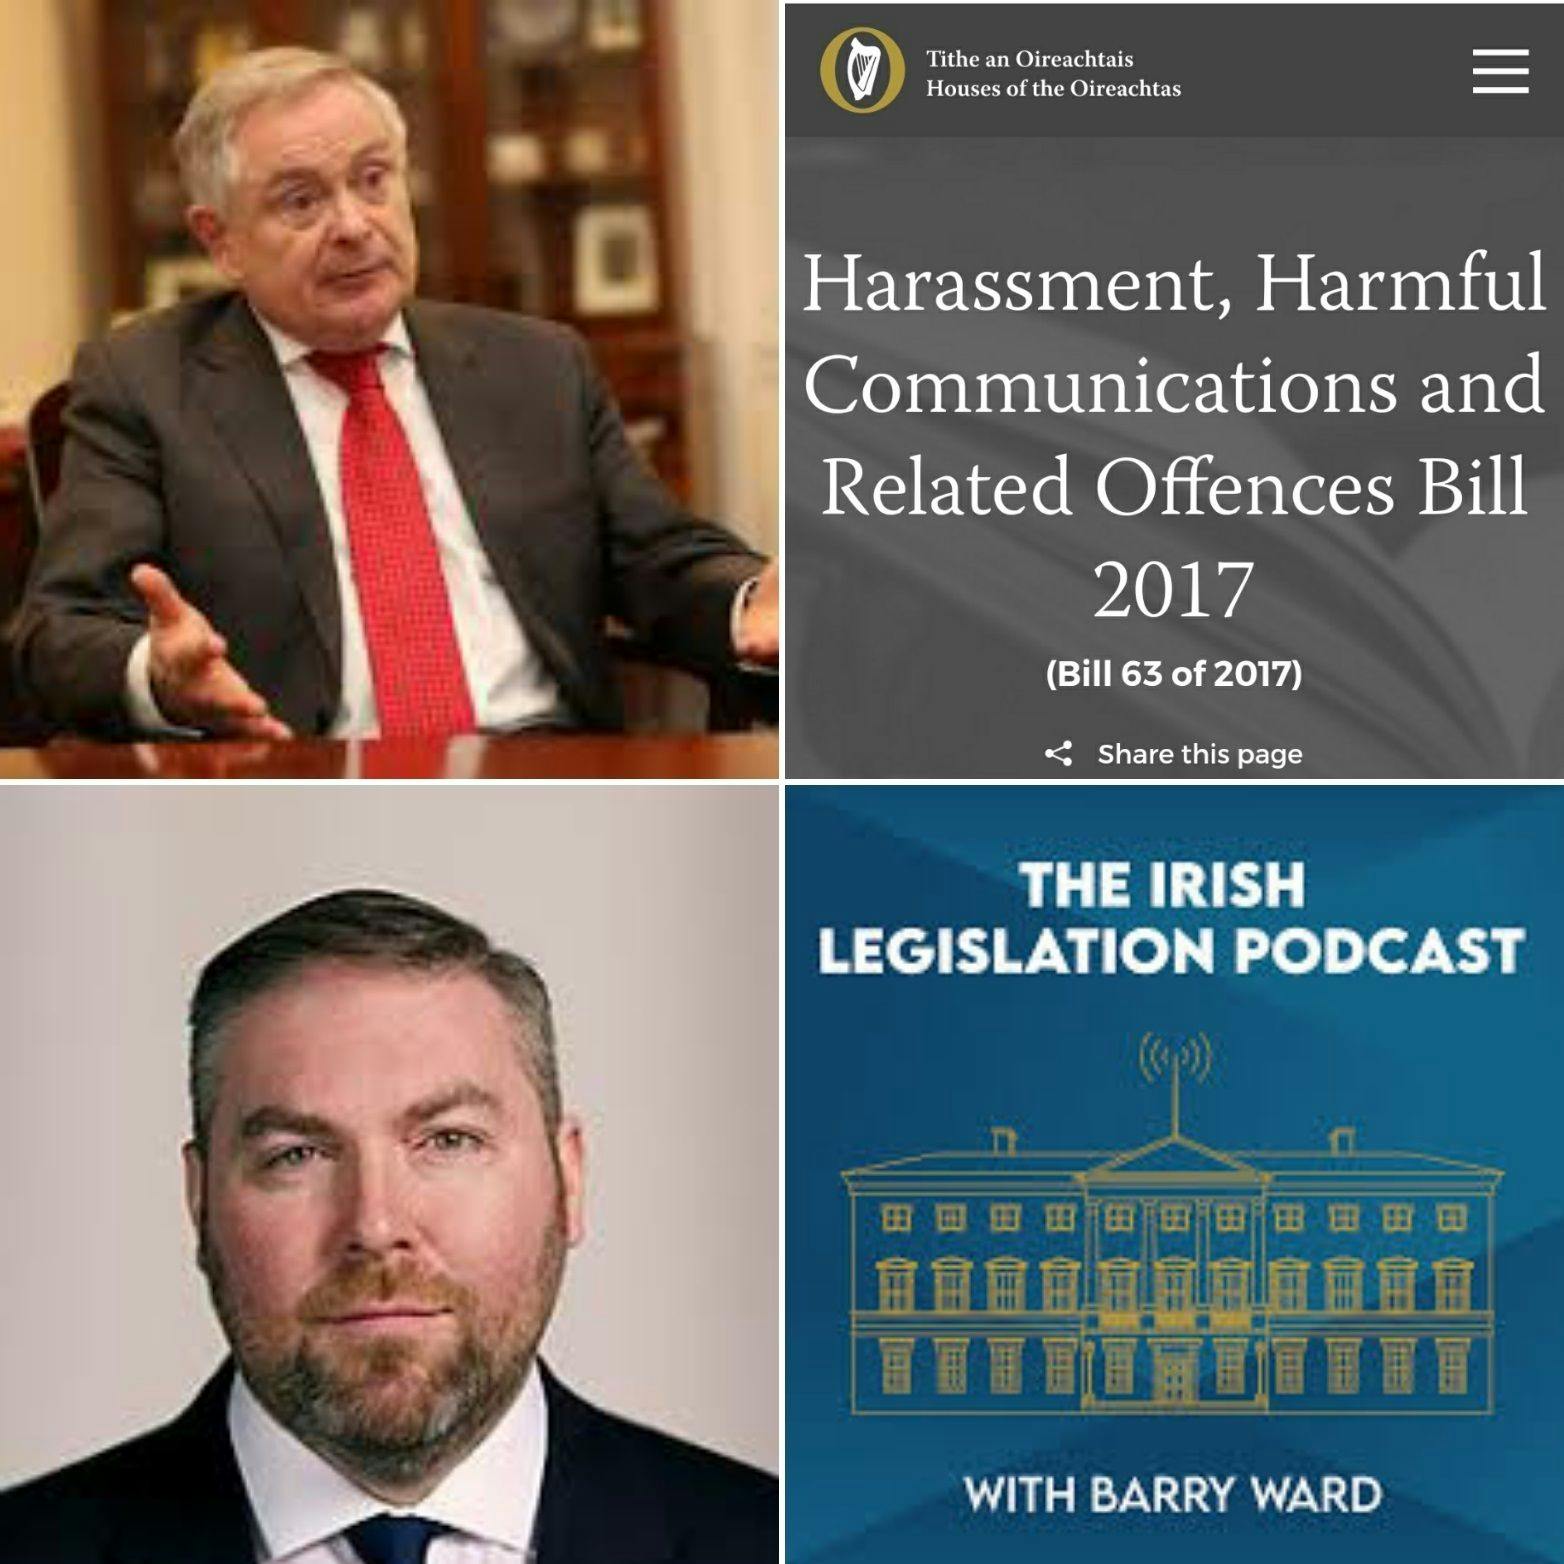 S1 Ep8: Harassment, Harmful Communications and Related Offences Bill 2017 with Brendan Howlin TD